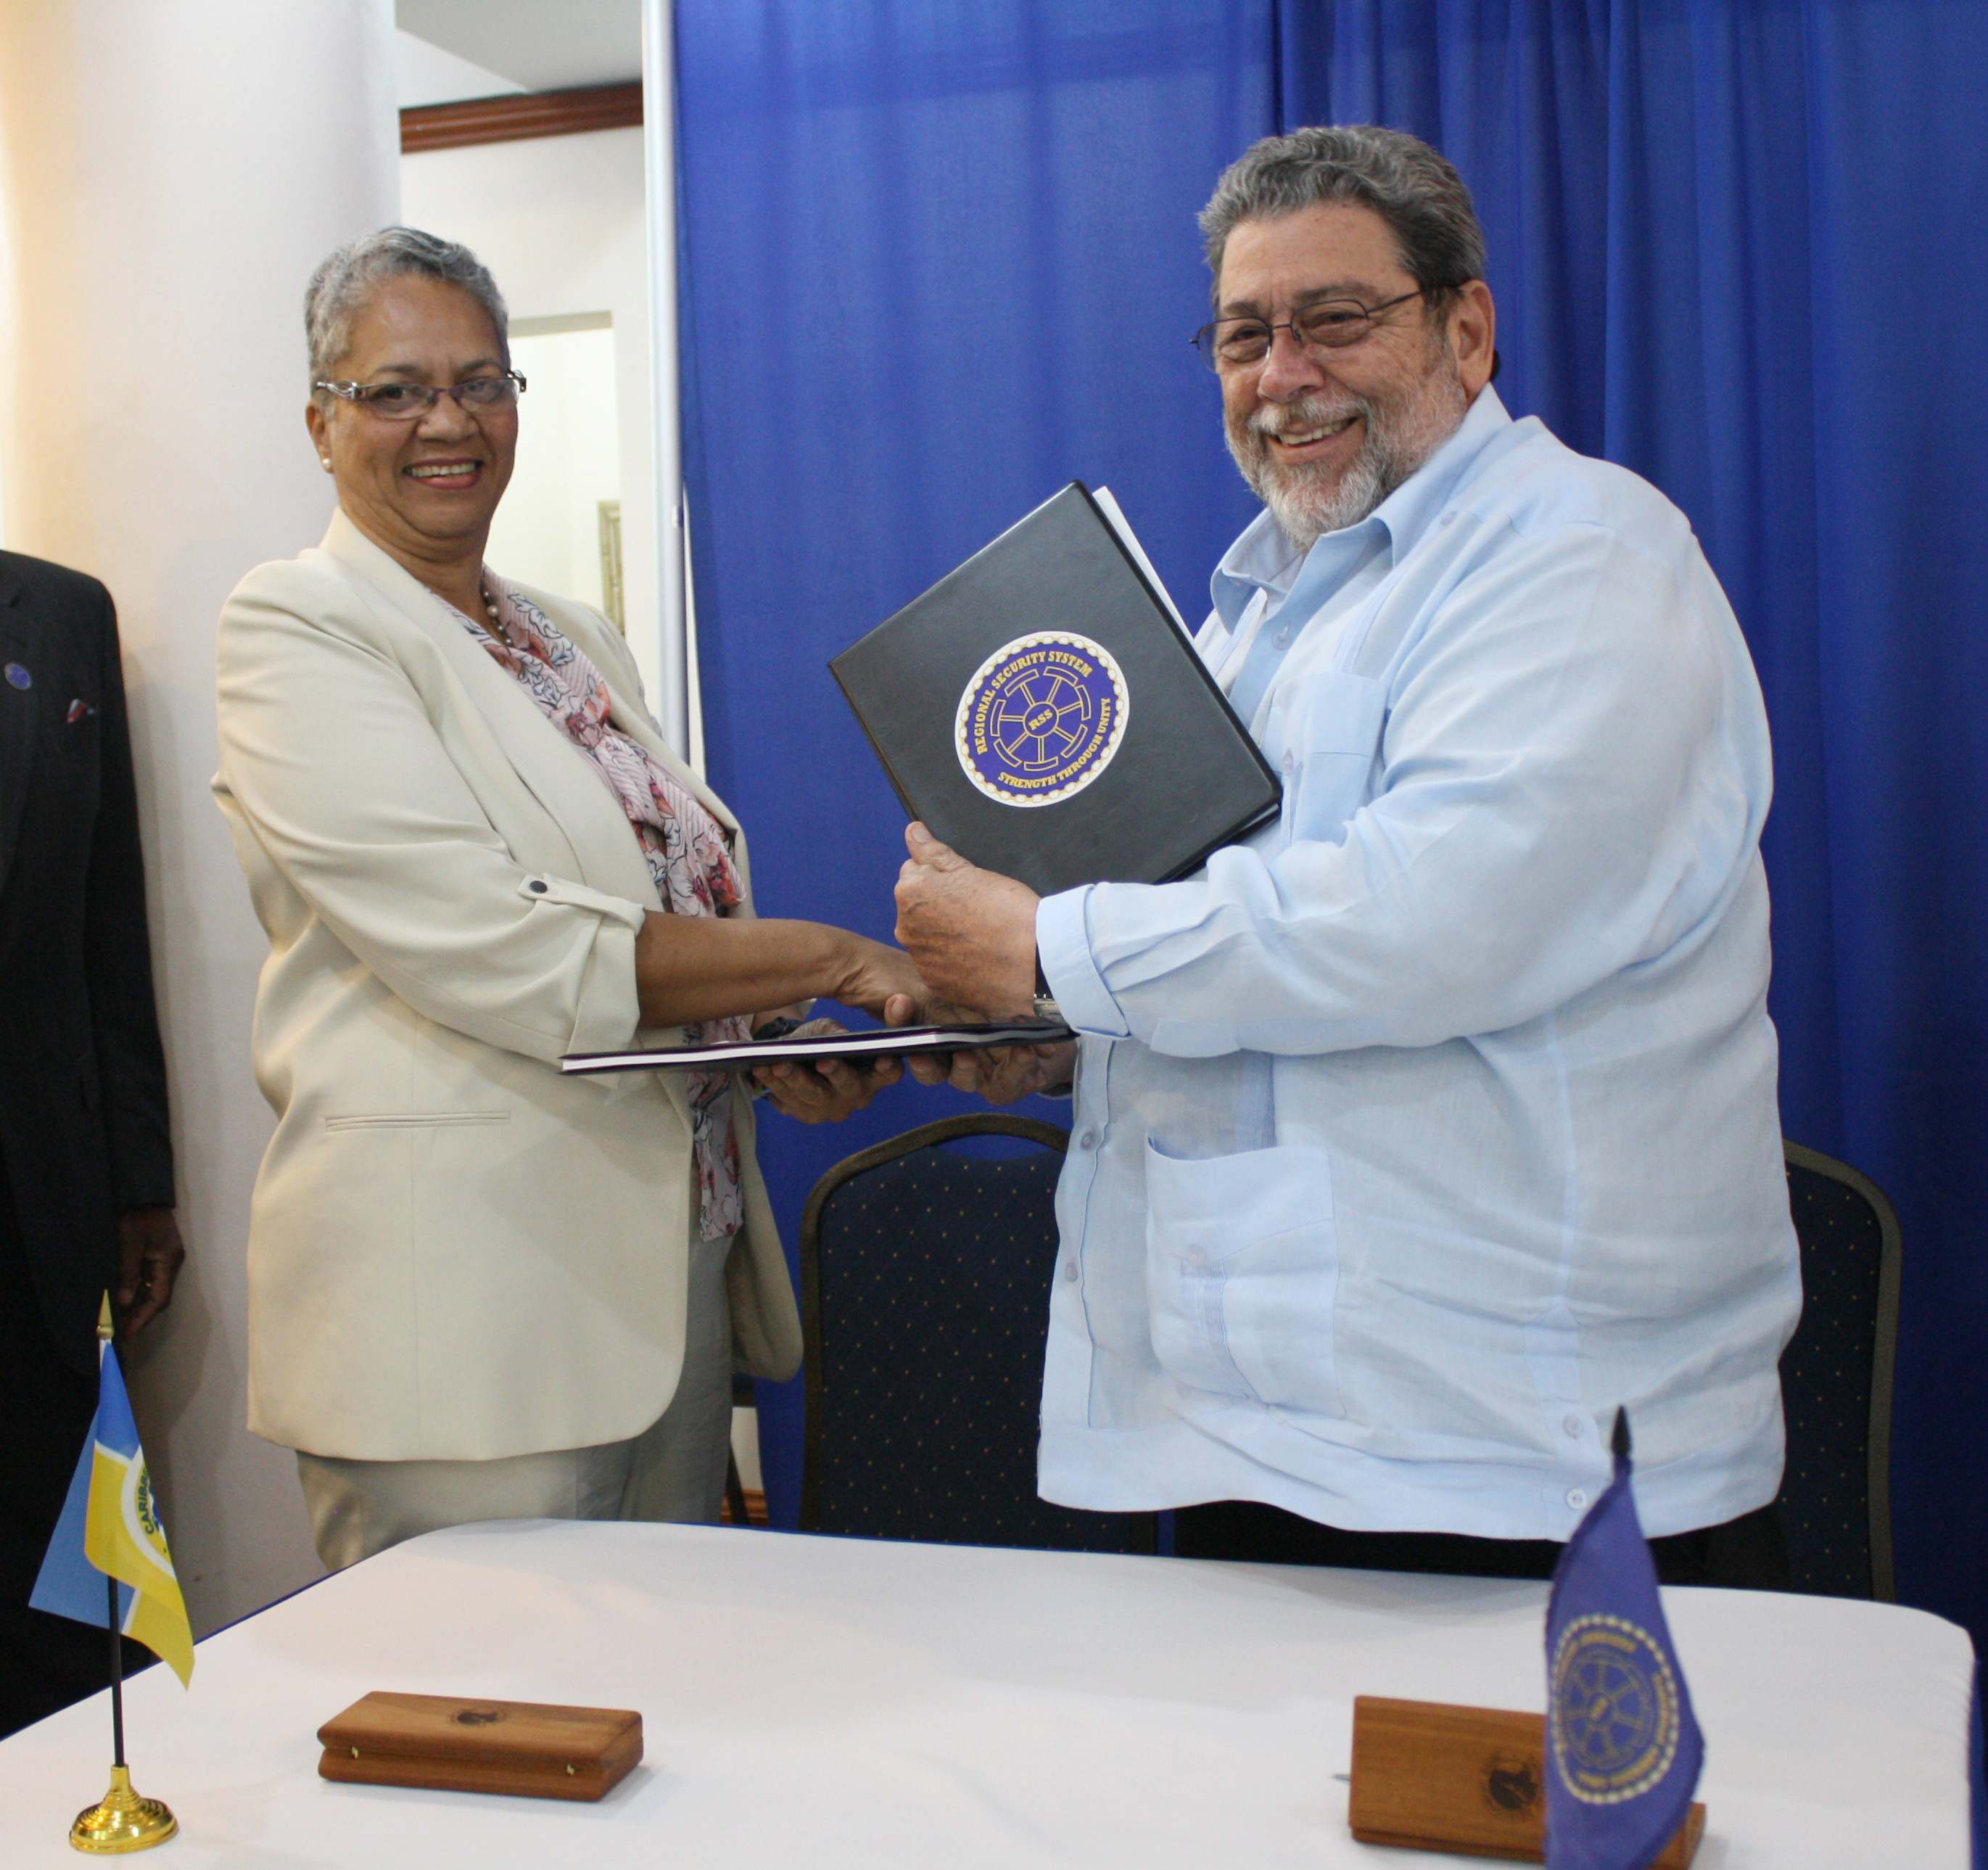 CDB Vice-President Monica La Bennett and RSS Chairman, St. Vincent and the Grenadines Prime Minister Dr. Ralph Gonsalves smiling facing camera.